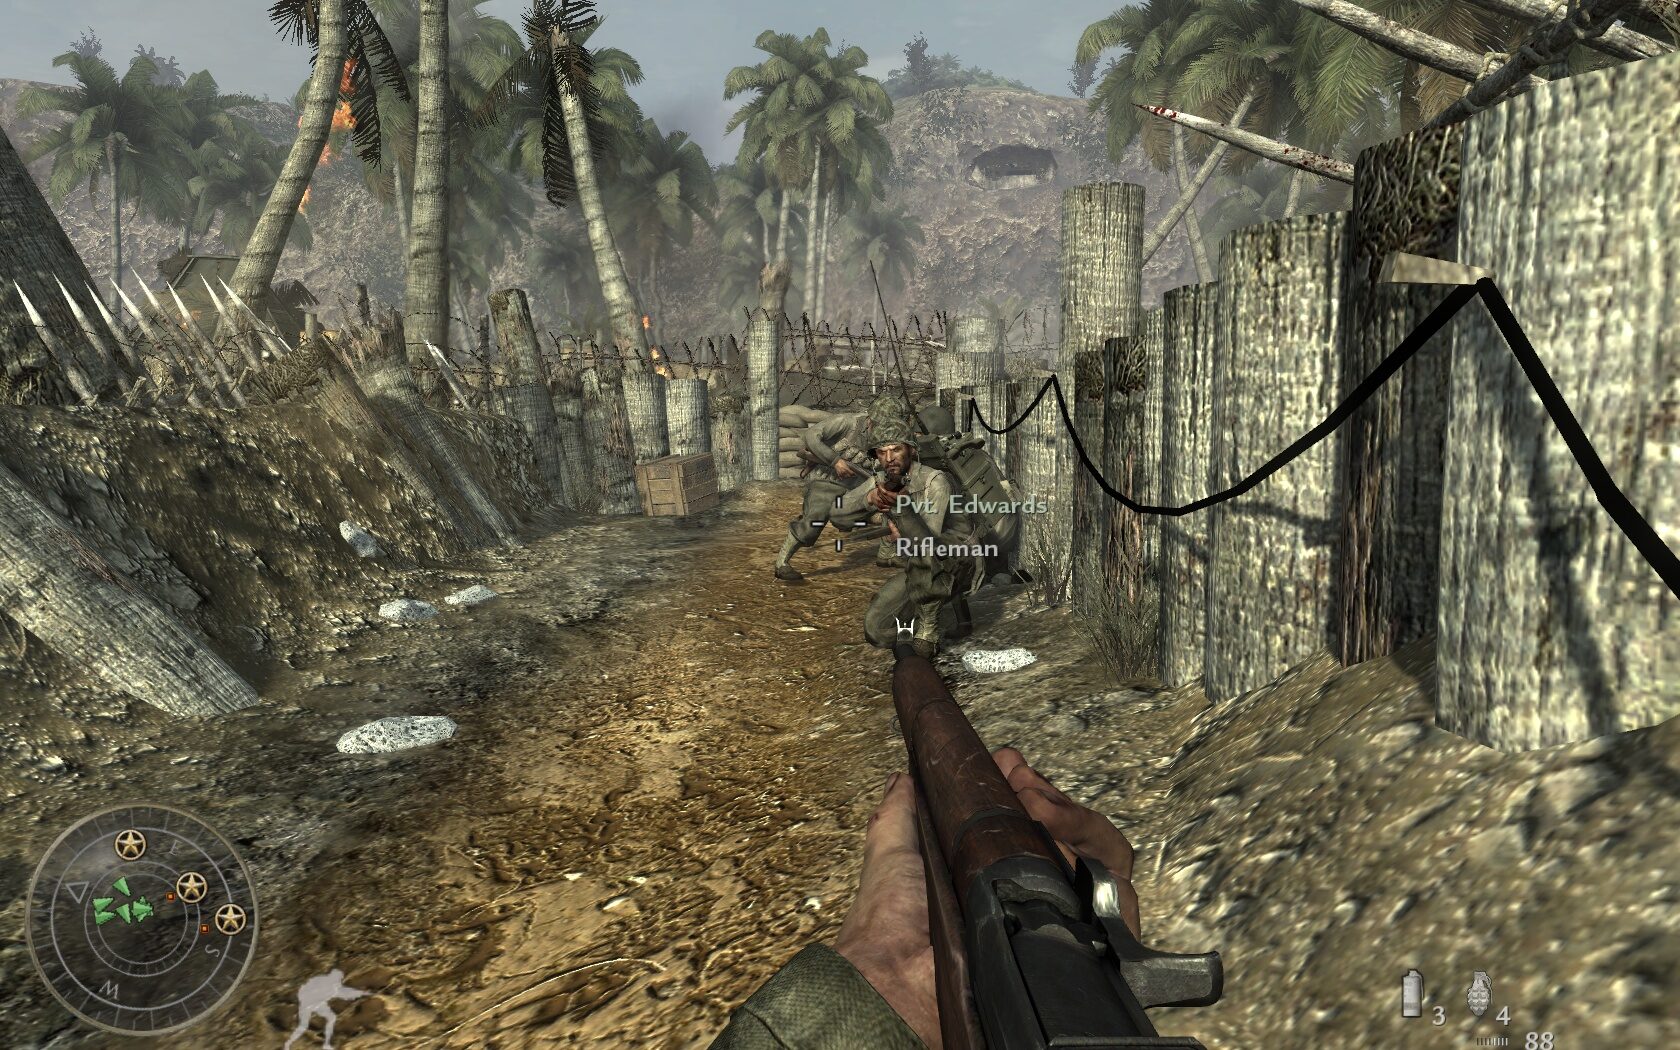 call-of-duty-world-at-war-crack-download-pc-full-version-free-15-4635010